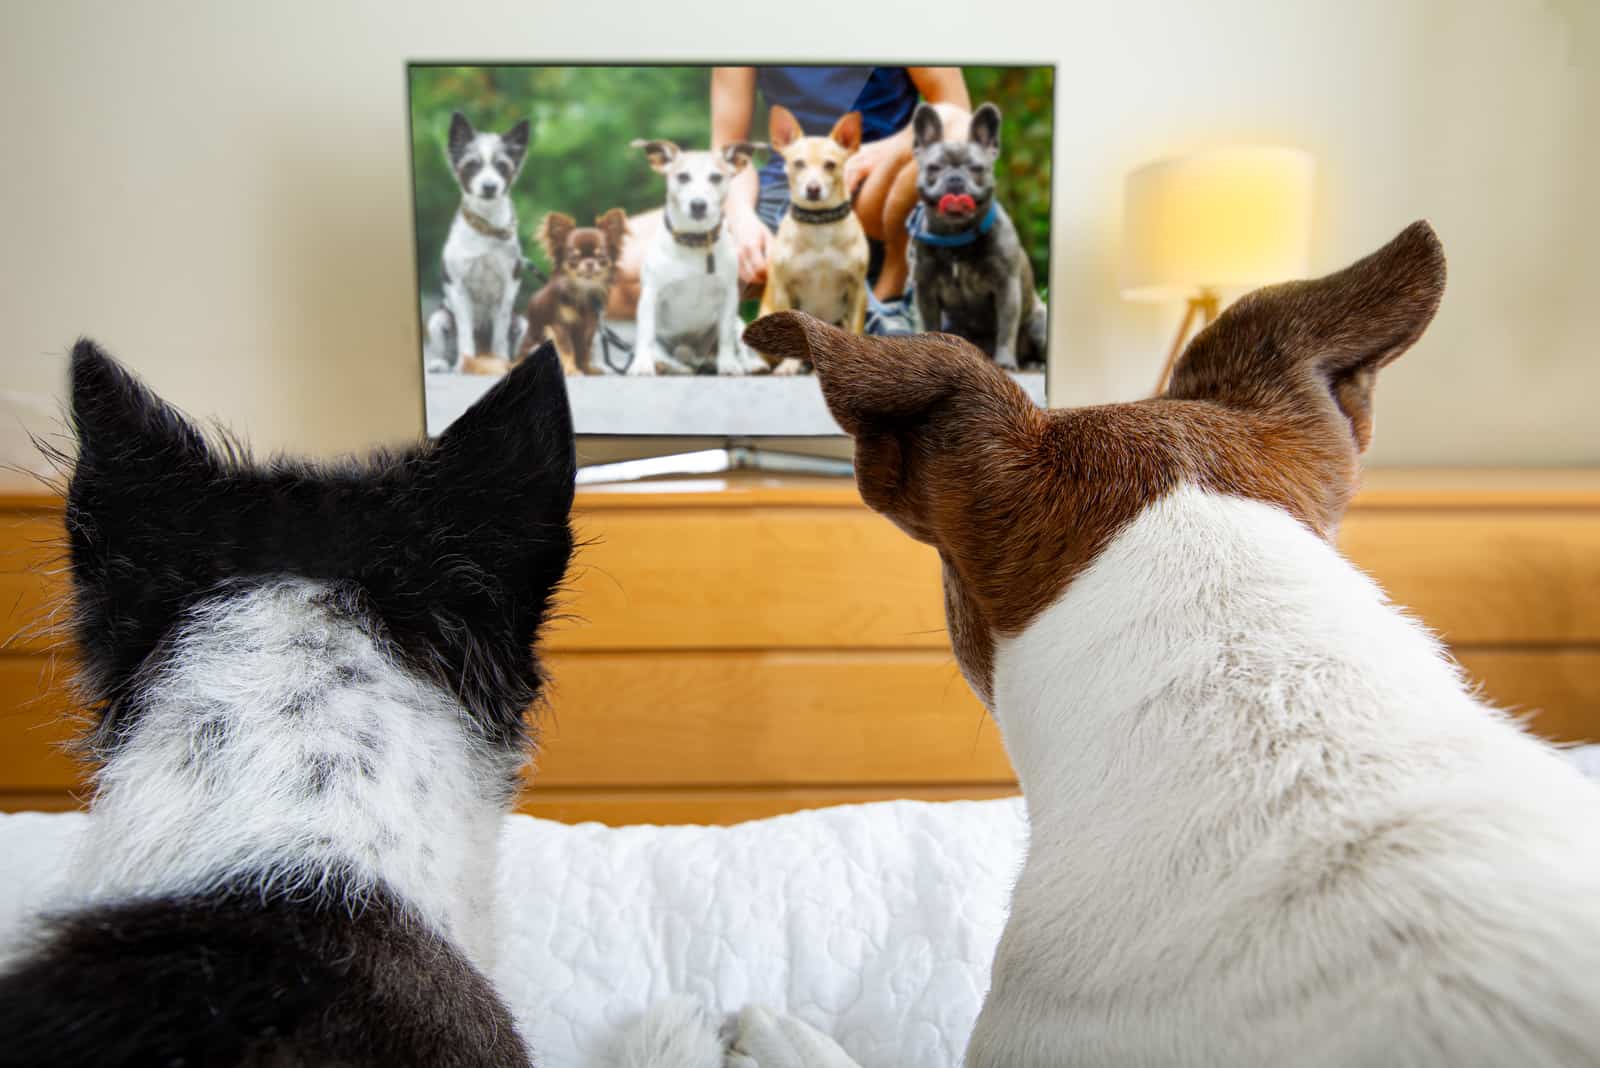 couple of dogs wacthing streaming tv program